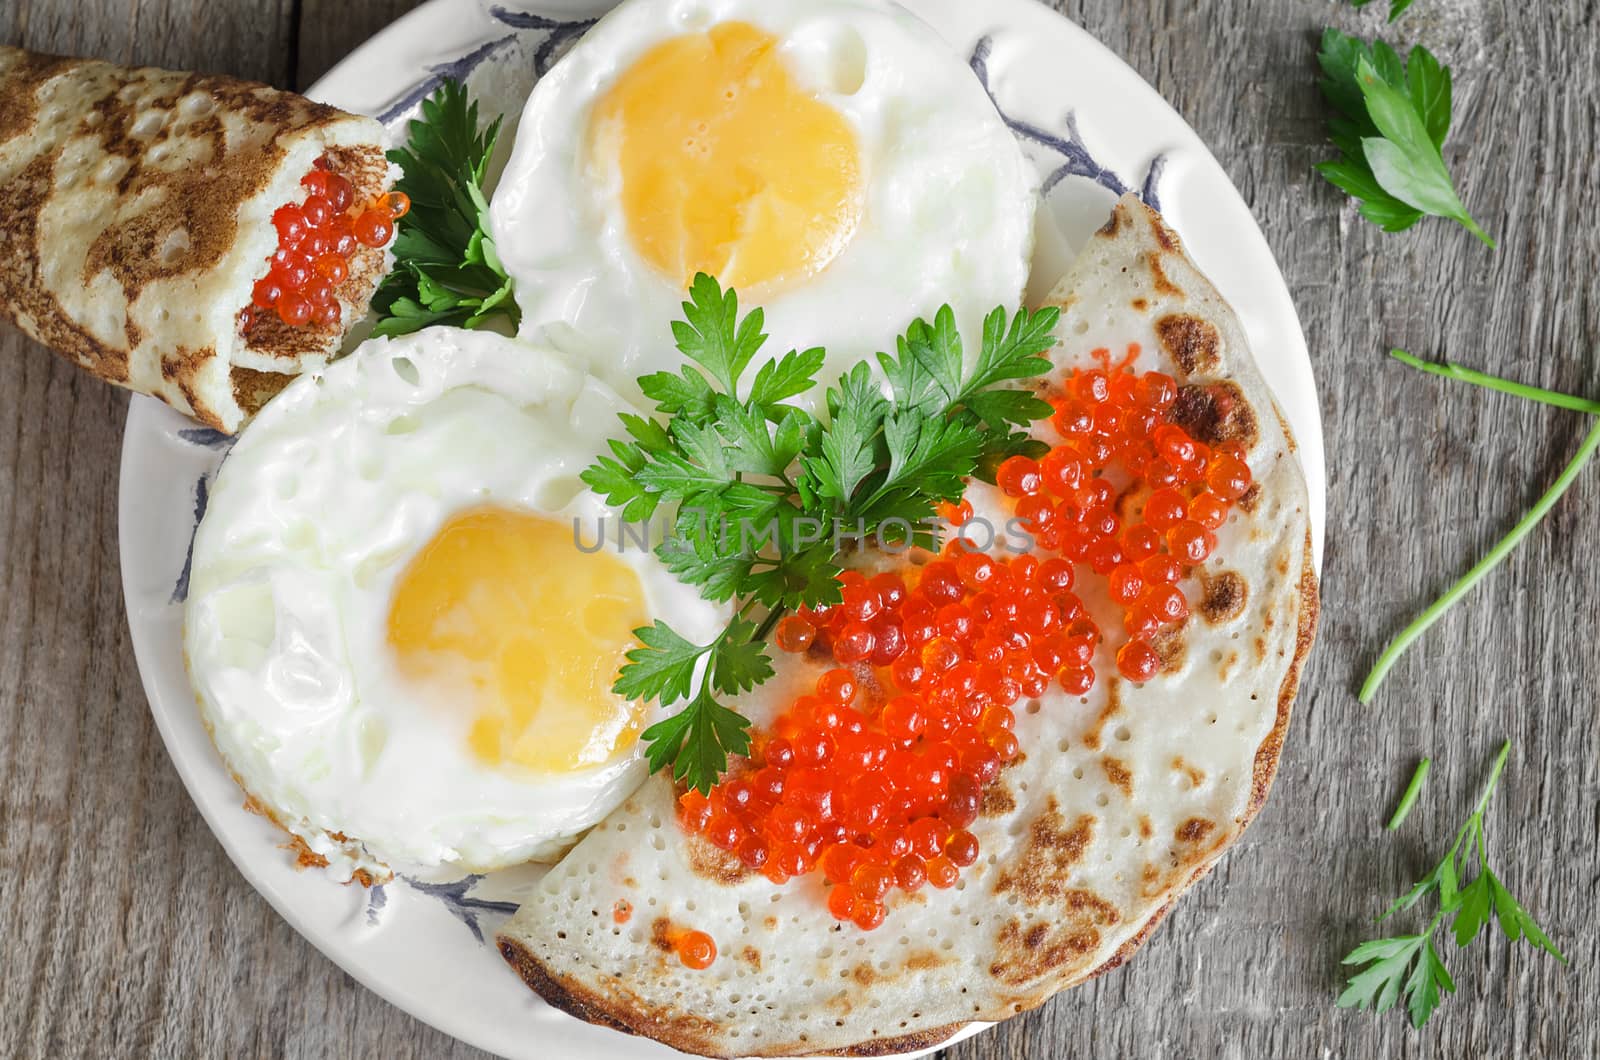 Scrambled eggs and pancakes with red caviar on an old wooden surface.